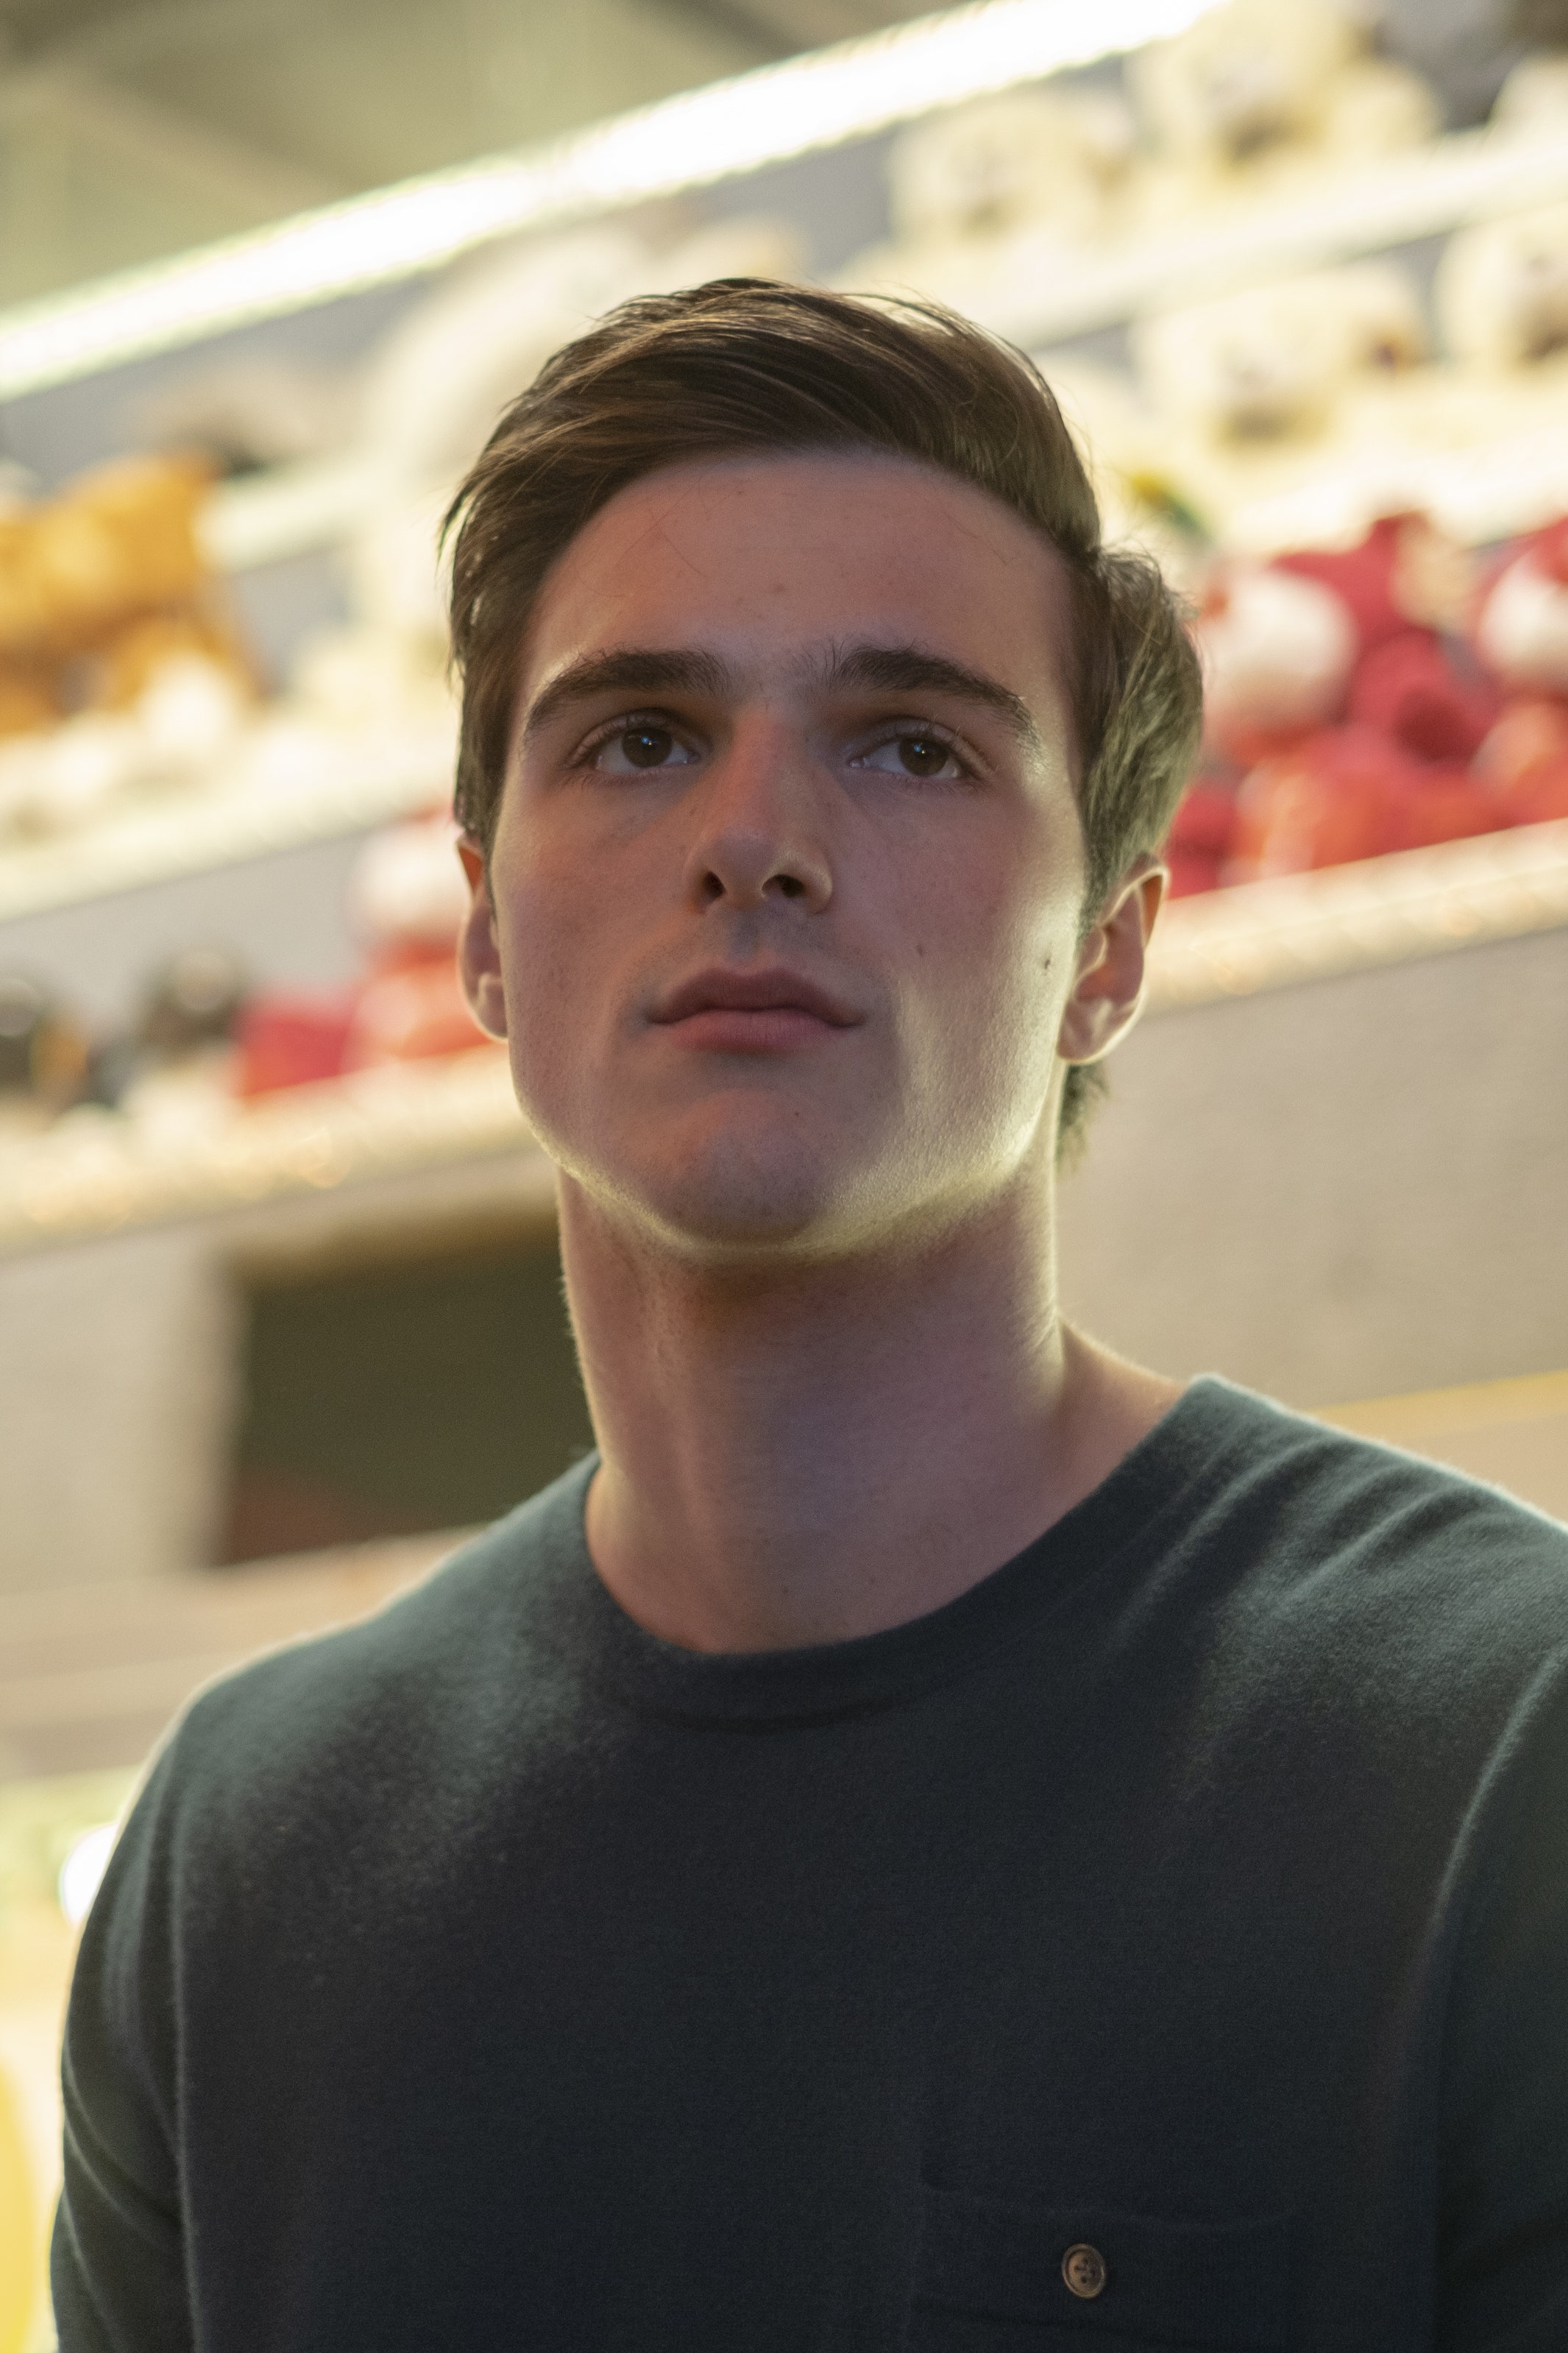 Jacob Elordi Shares “Euphoria” Picture, Excerpts From Acting Journal